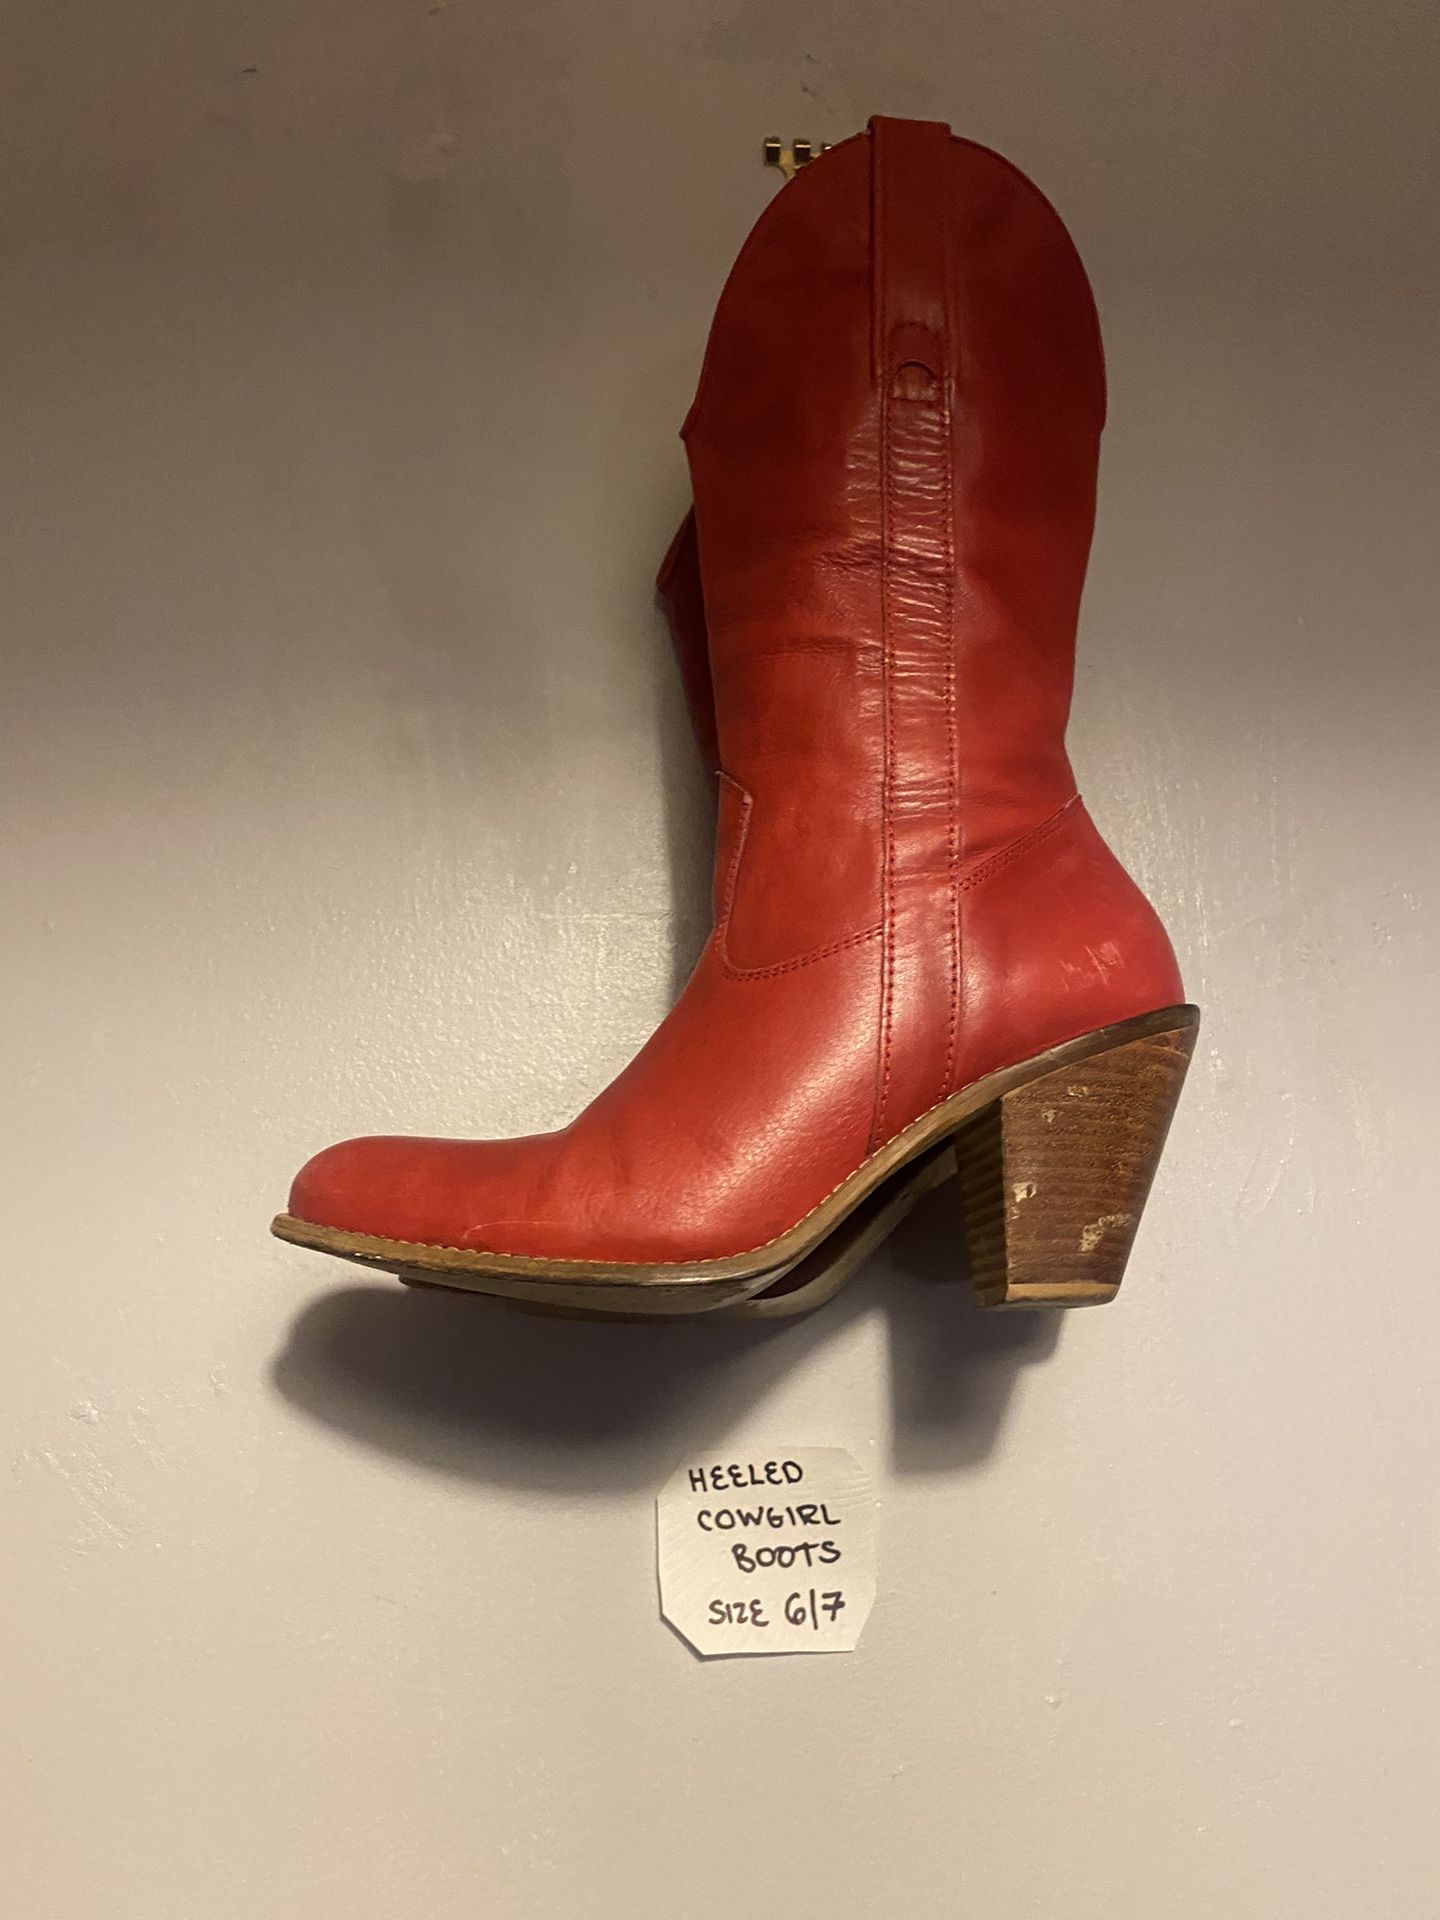 Womens Size 6/7 Heeled Cowgirl Red Boots 